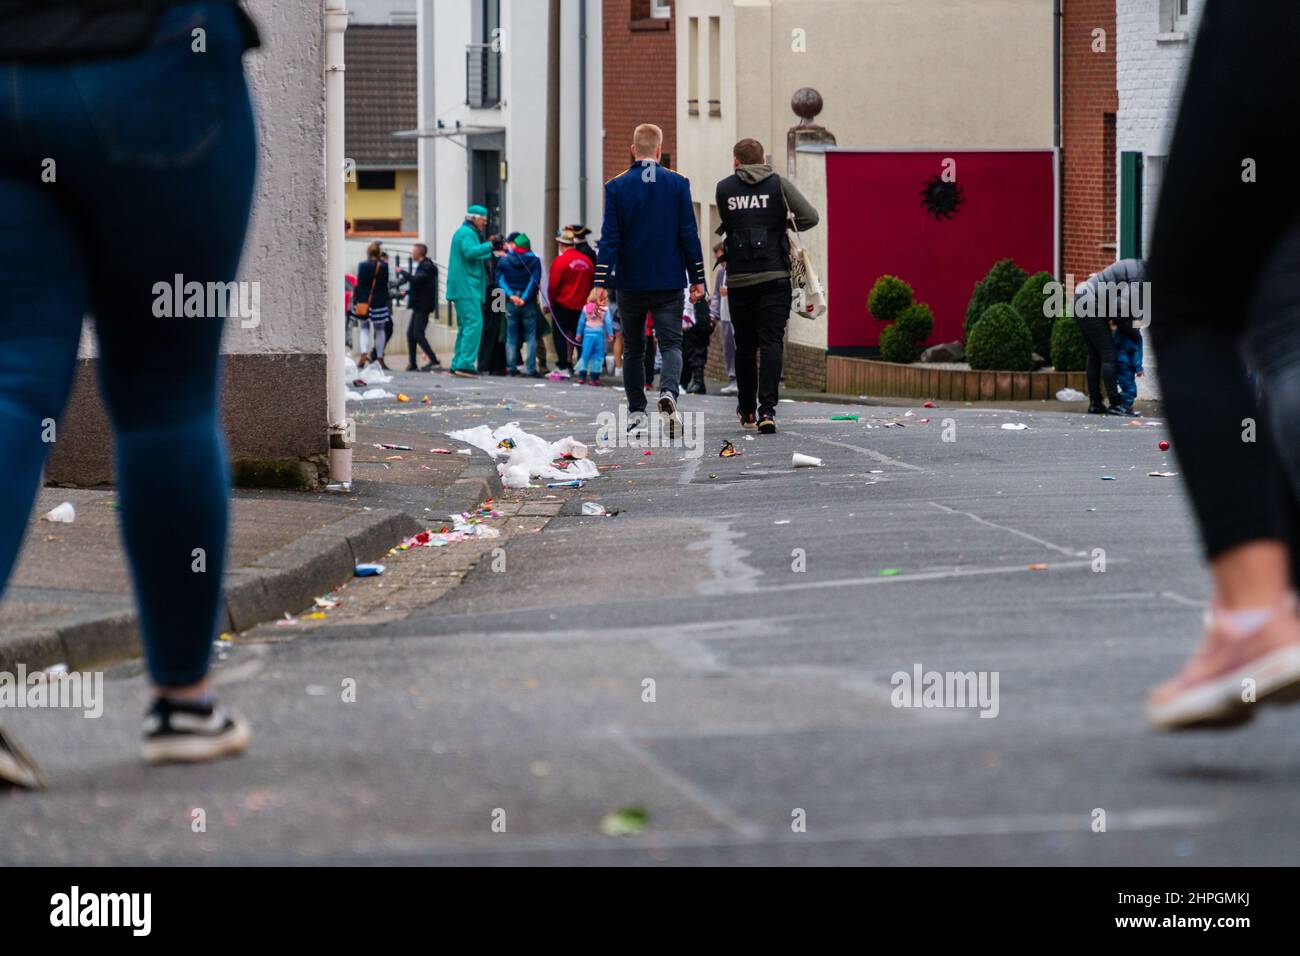 Bornheim, North Rhine-Westphalia, Germany - February 22, 2020: People walking along a street, dumped with trash, after a carnival parade. Stock Photo